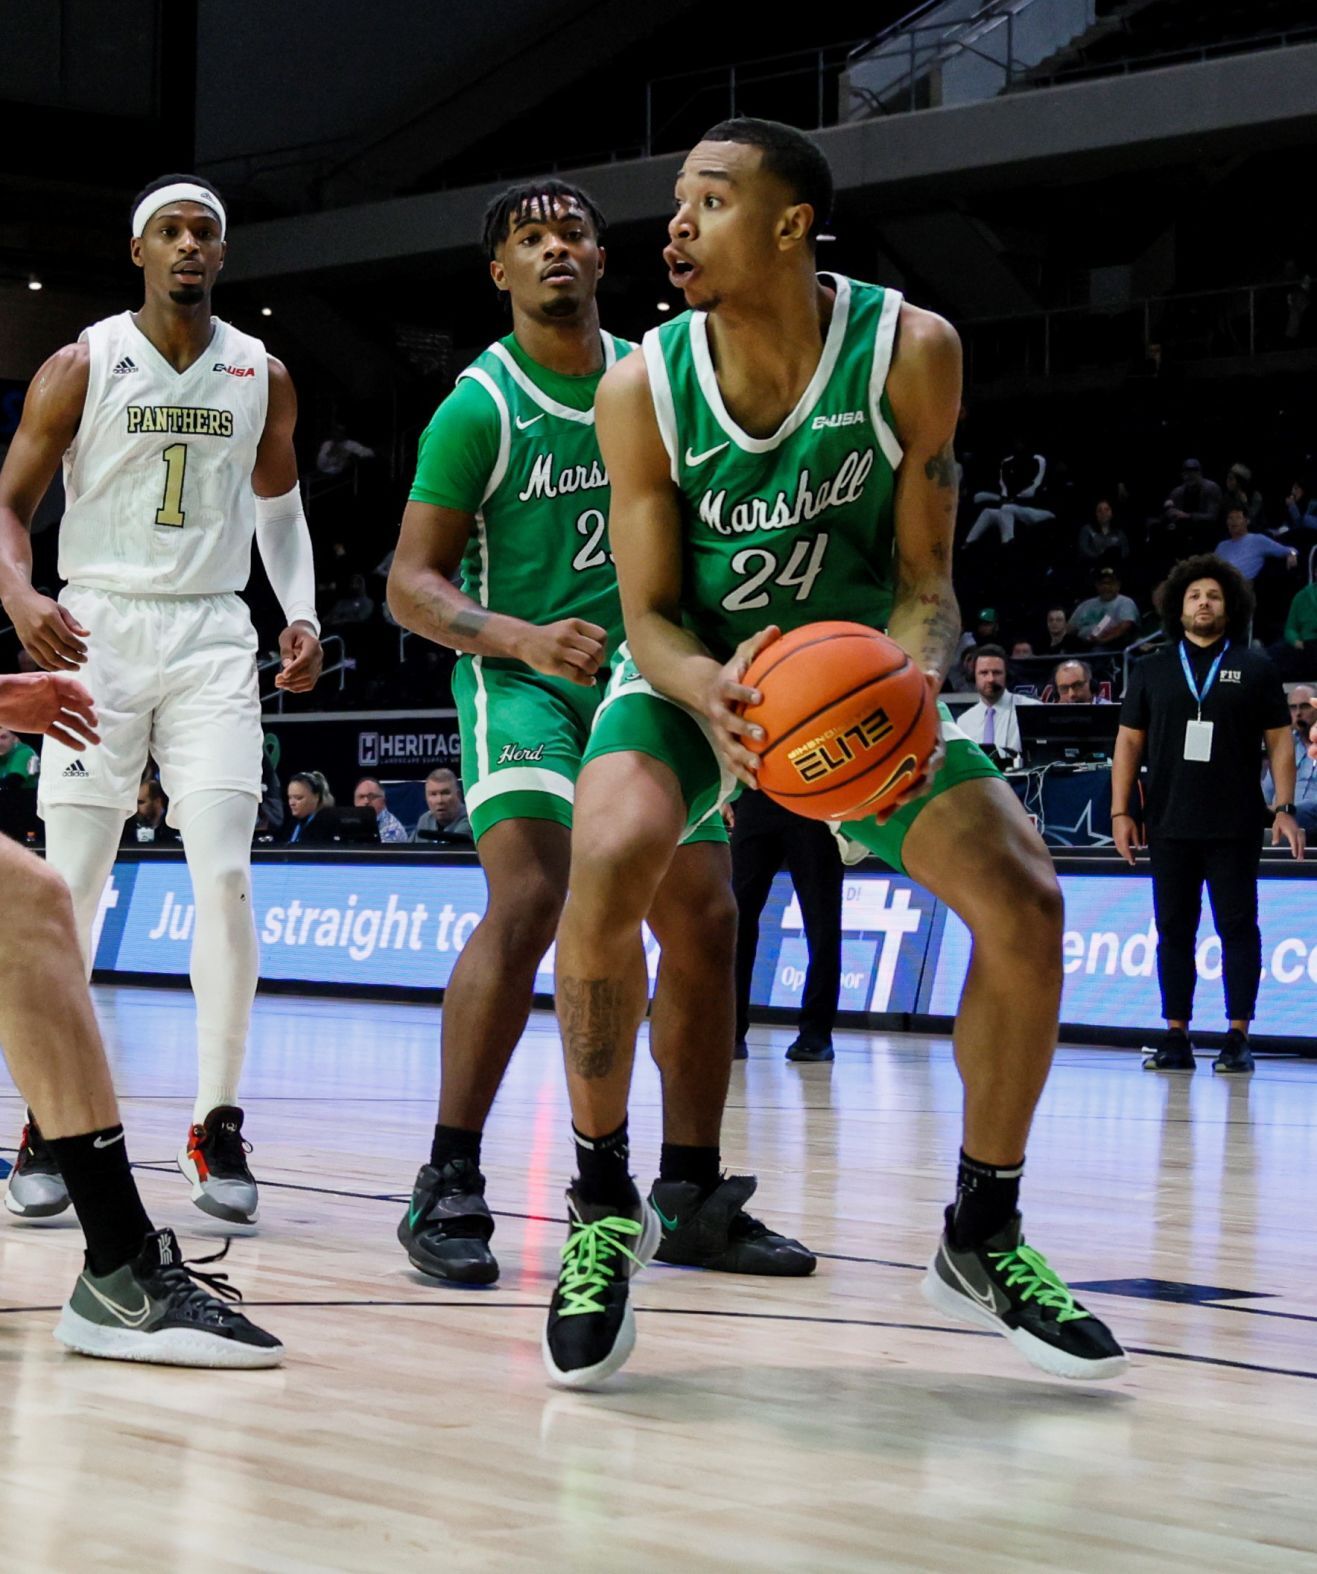 Marshall men's basketball: Herd leads wire-to-wire in 74-62 win